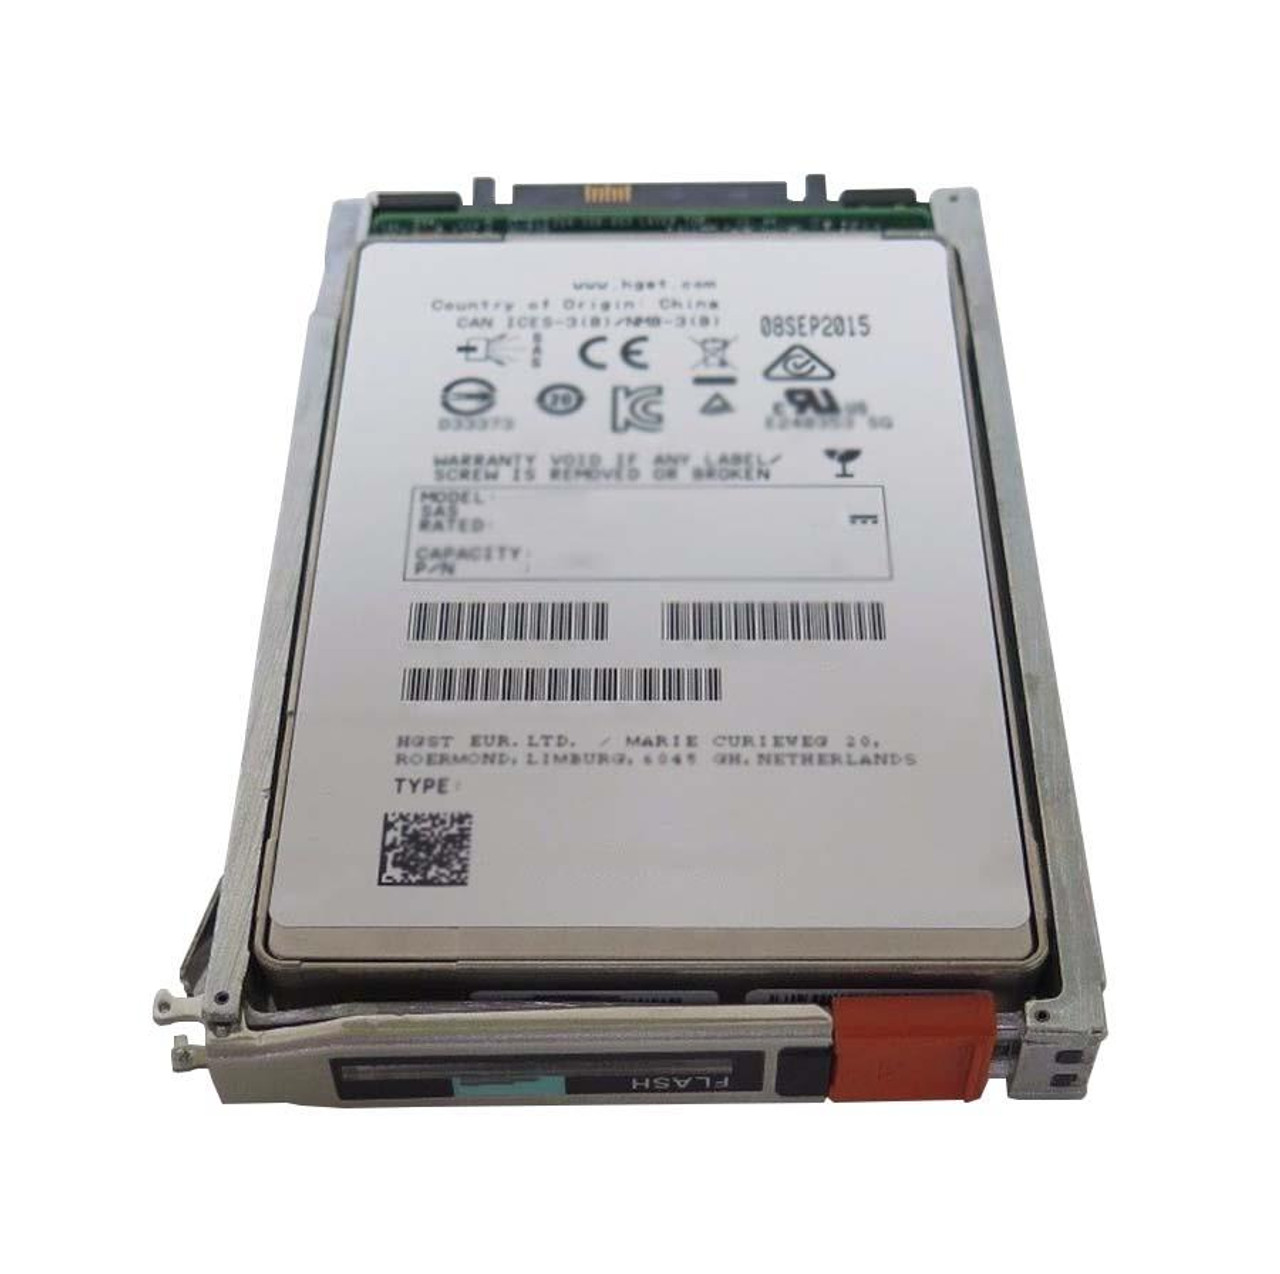 EL6F39607BT2 EMC 960GB SAS 6Gbps 2.5-inch Internal Solid State Drive (SSD) with RAID5 (7+1 Configuration) for VMAX 3